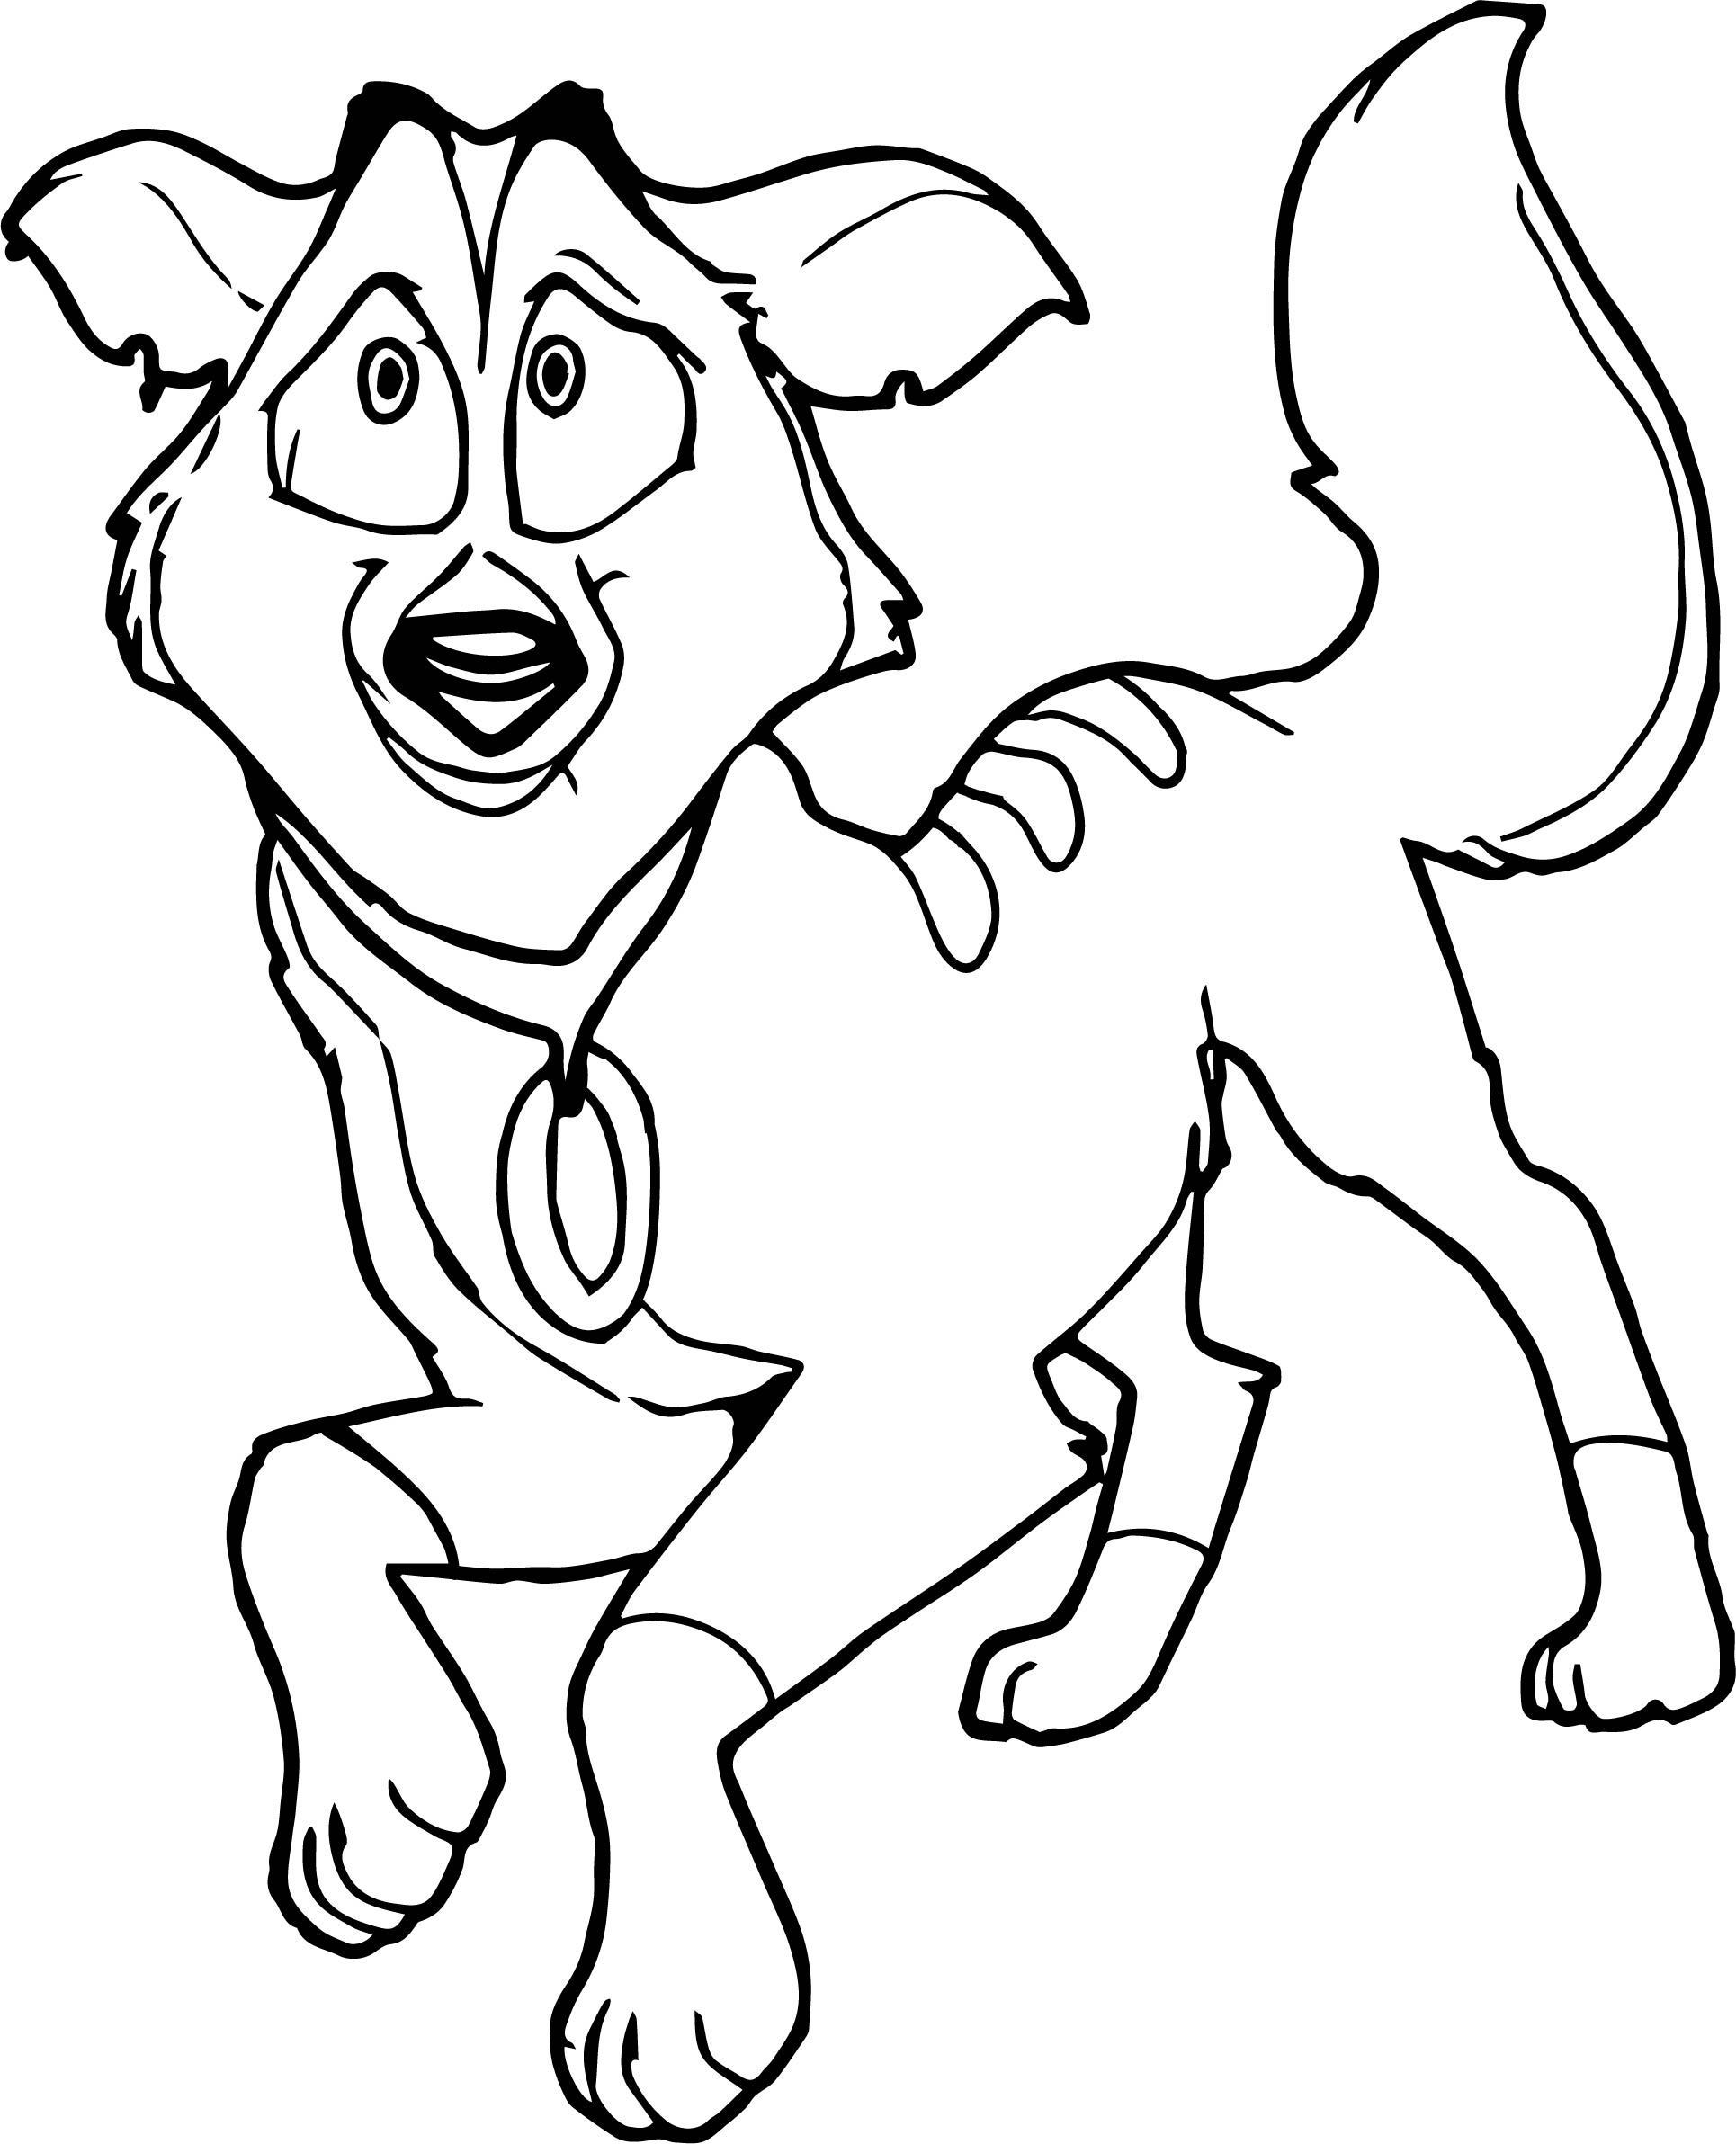 Toy Story Jessie Coloring Pages at GetColorings.com | Free printable